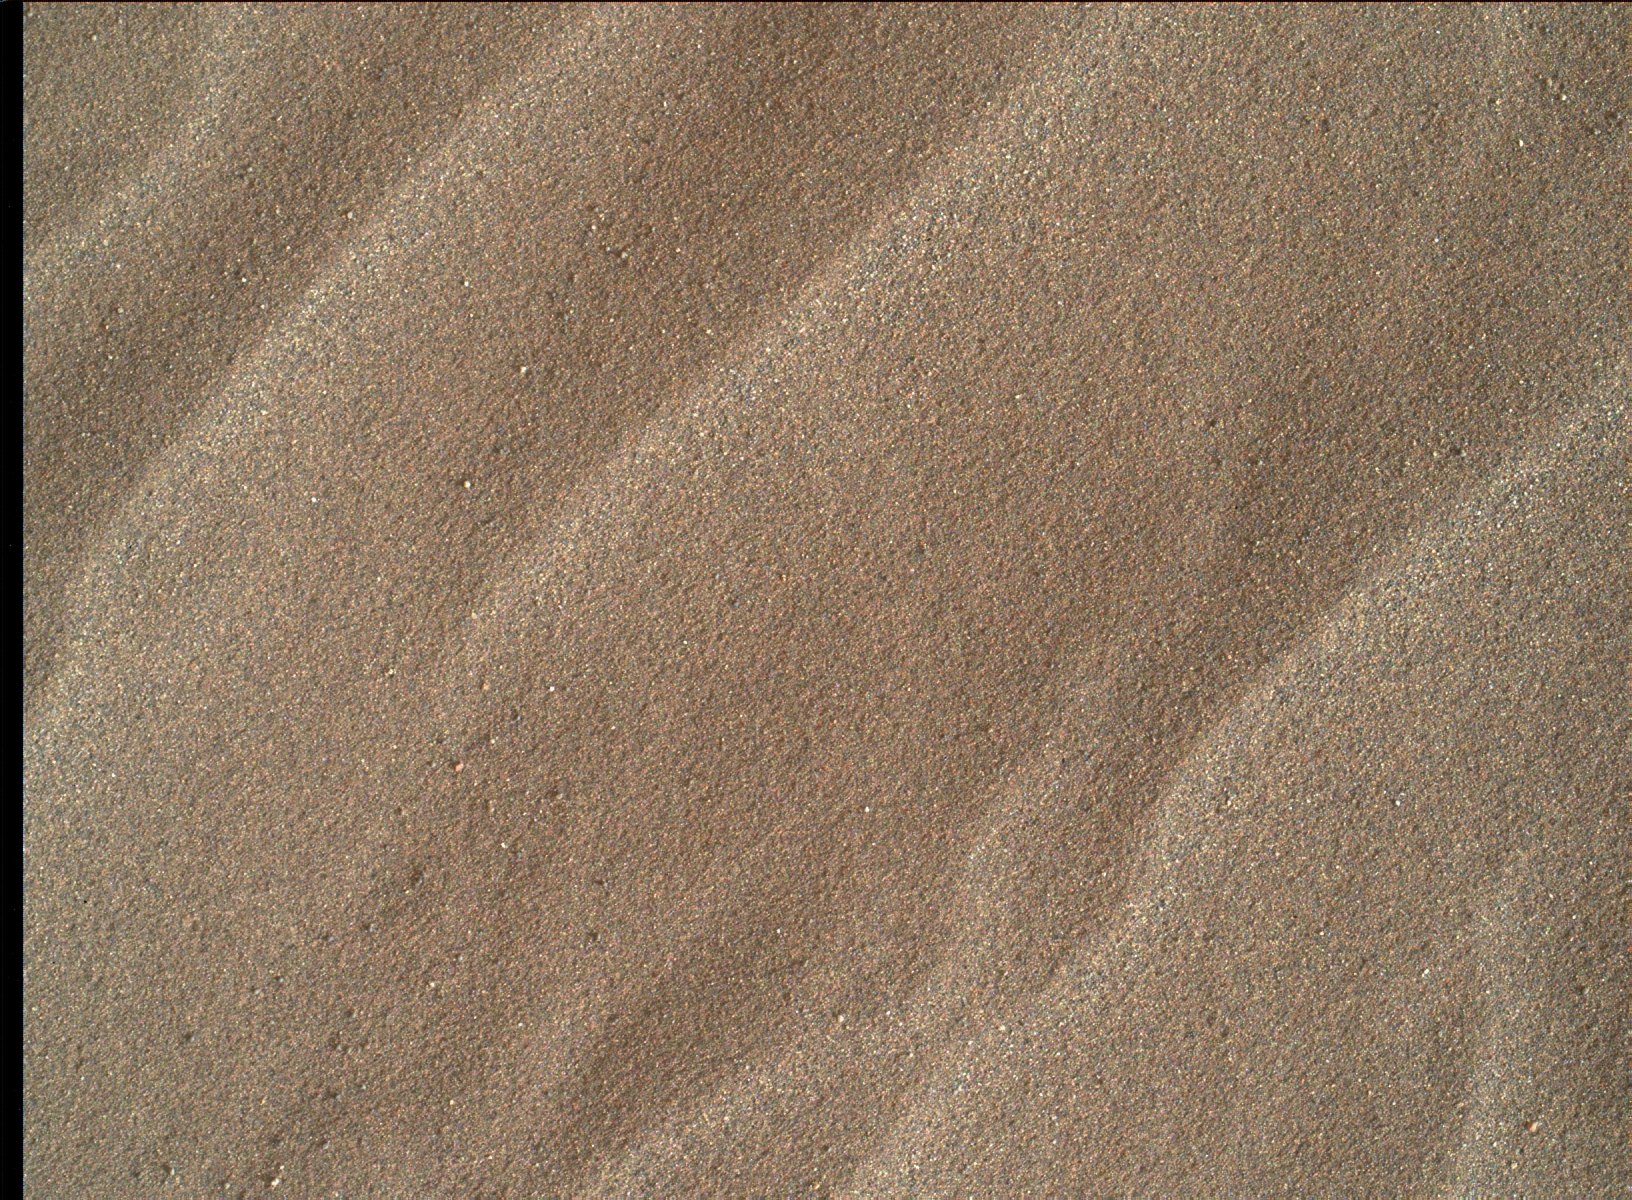 Nasa's Mars rover Curiosity acquired this image using its Mars Hand Lens Imager (MAHLI) on Sol 1637